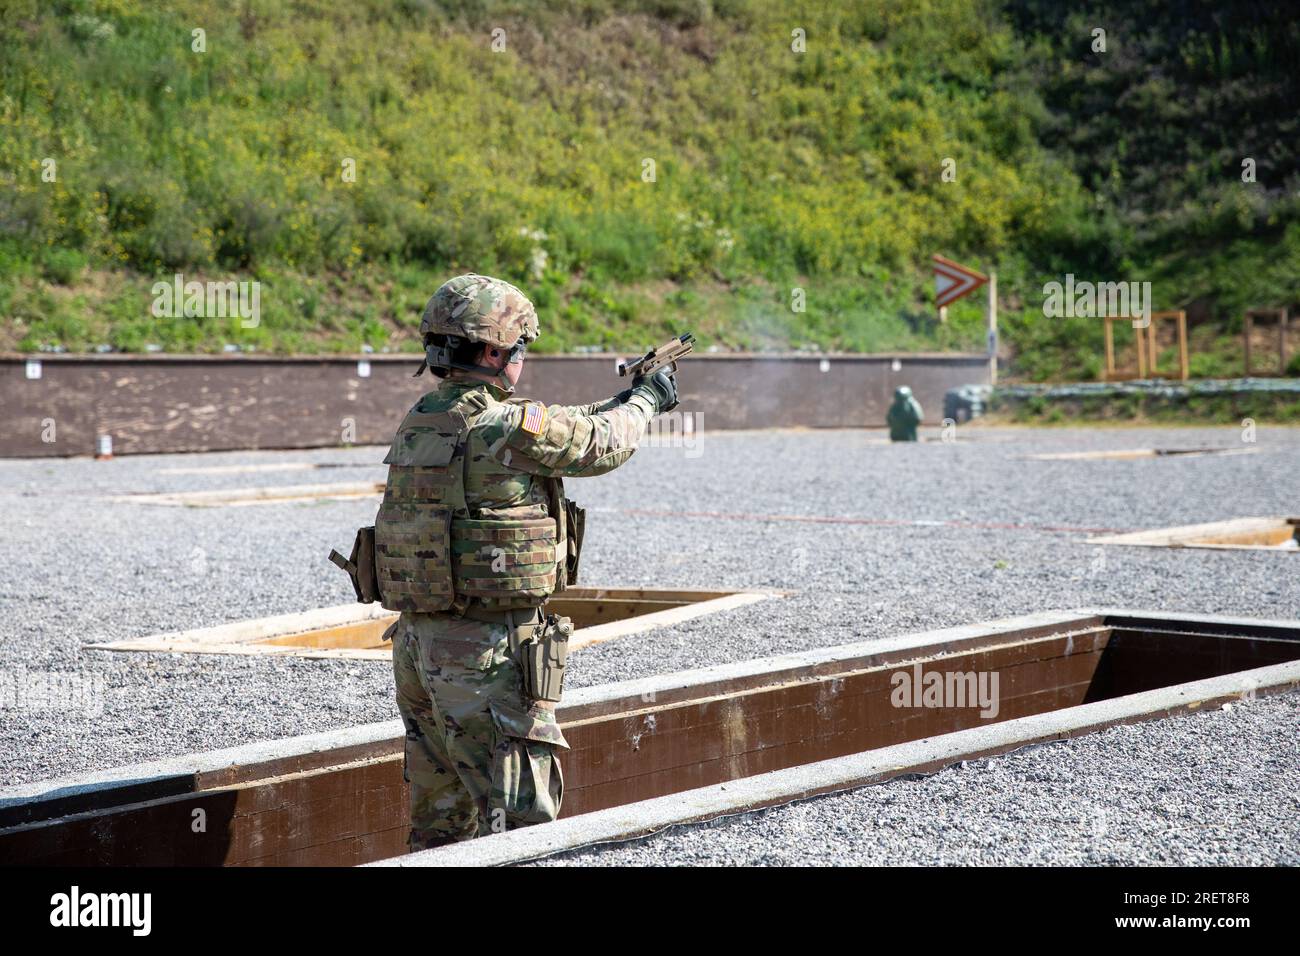 U.S. KFOR Soldiers assigned to Regional Command East engage targets during an M17 pistol range on Camp Bondsteel, Kosovo, on July 17, 2023. Basic marksmanship is a core Soldier skill that all military members need to maintain. (U.S. Army National Guard photo by Sgt. Noah Moroski) Stock Photo